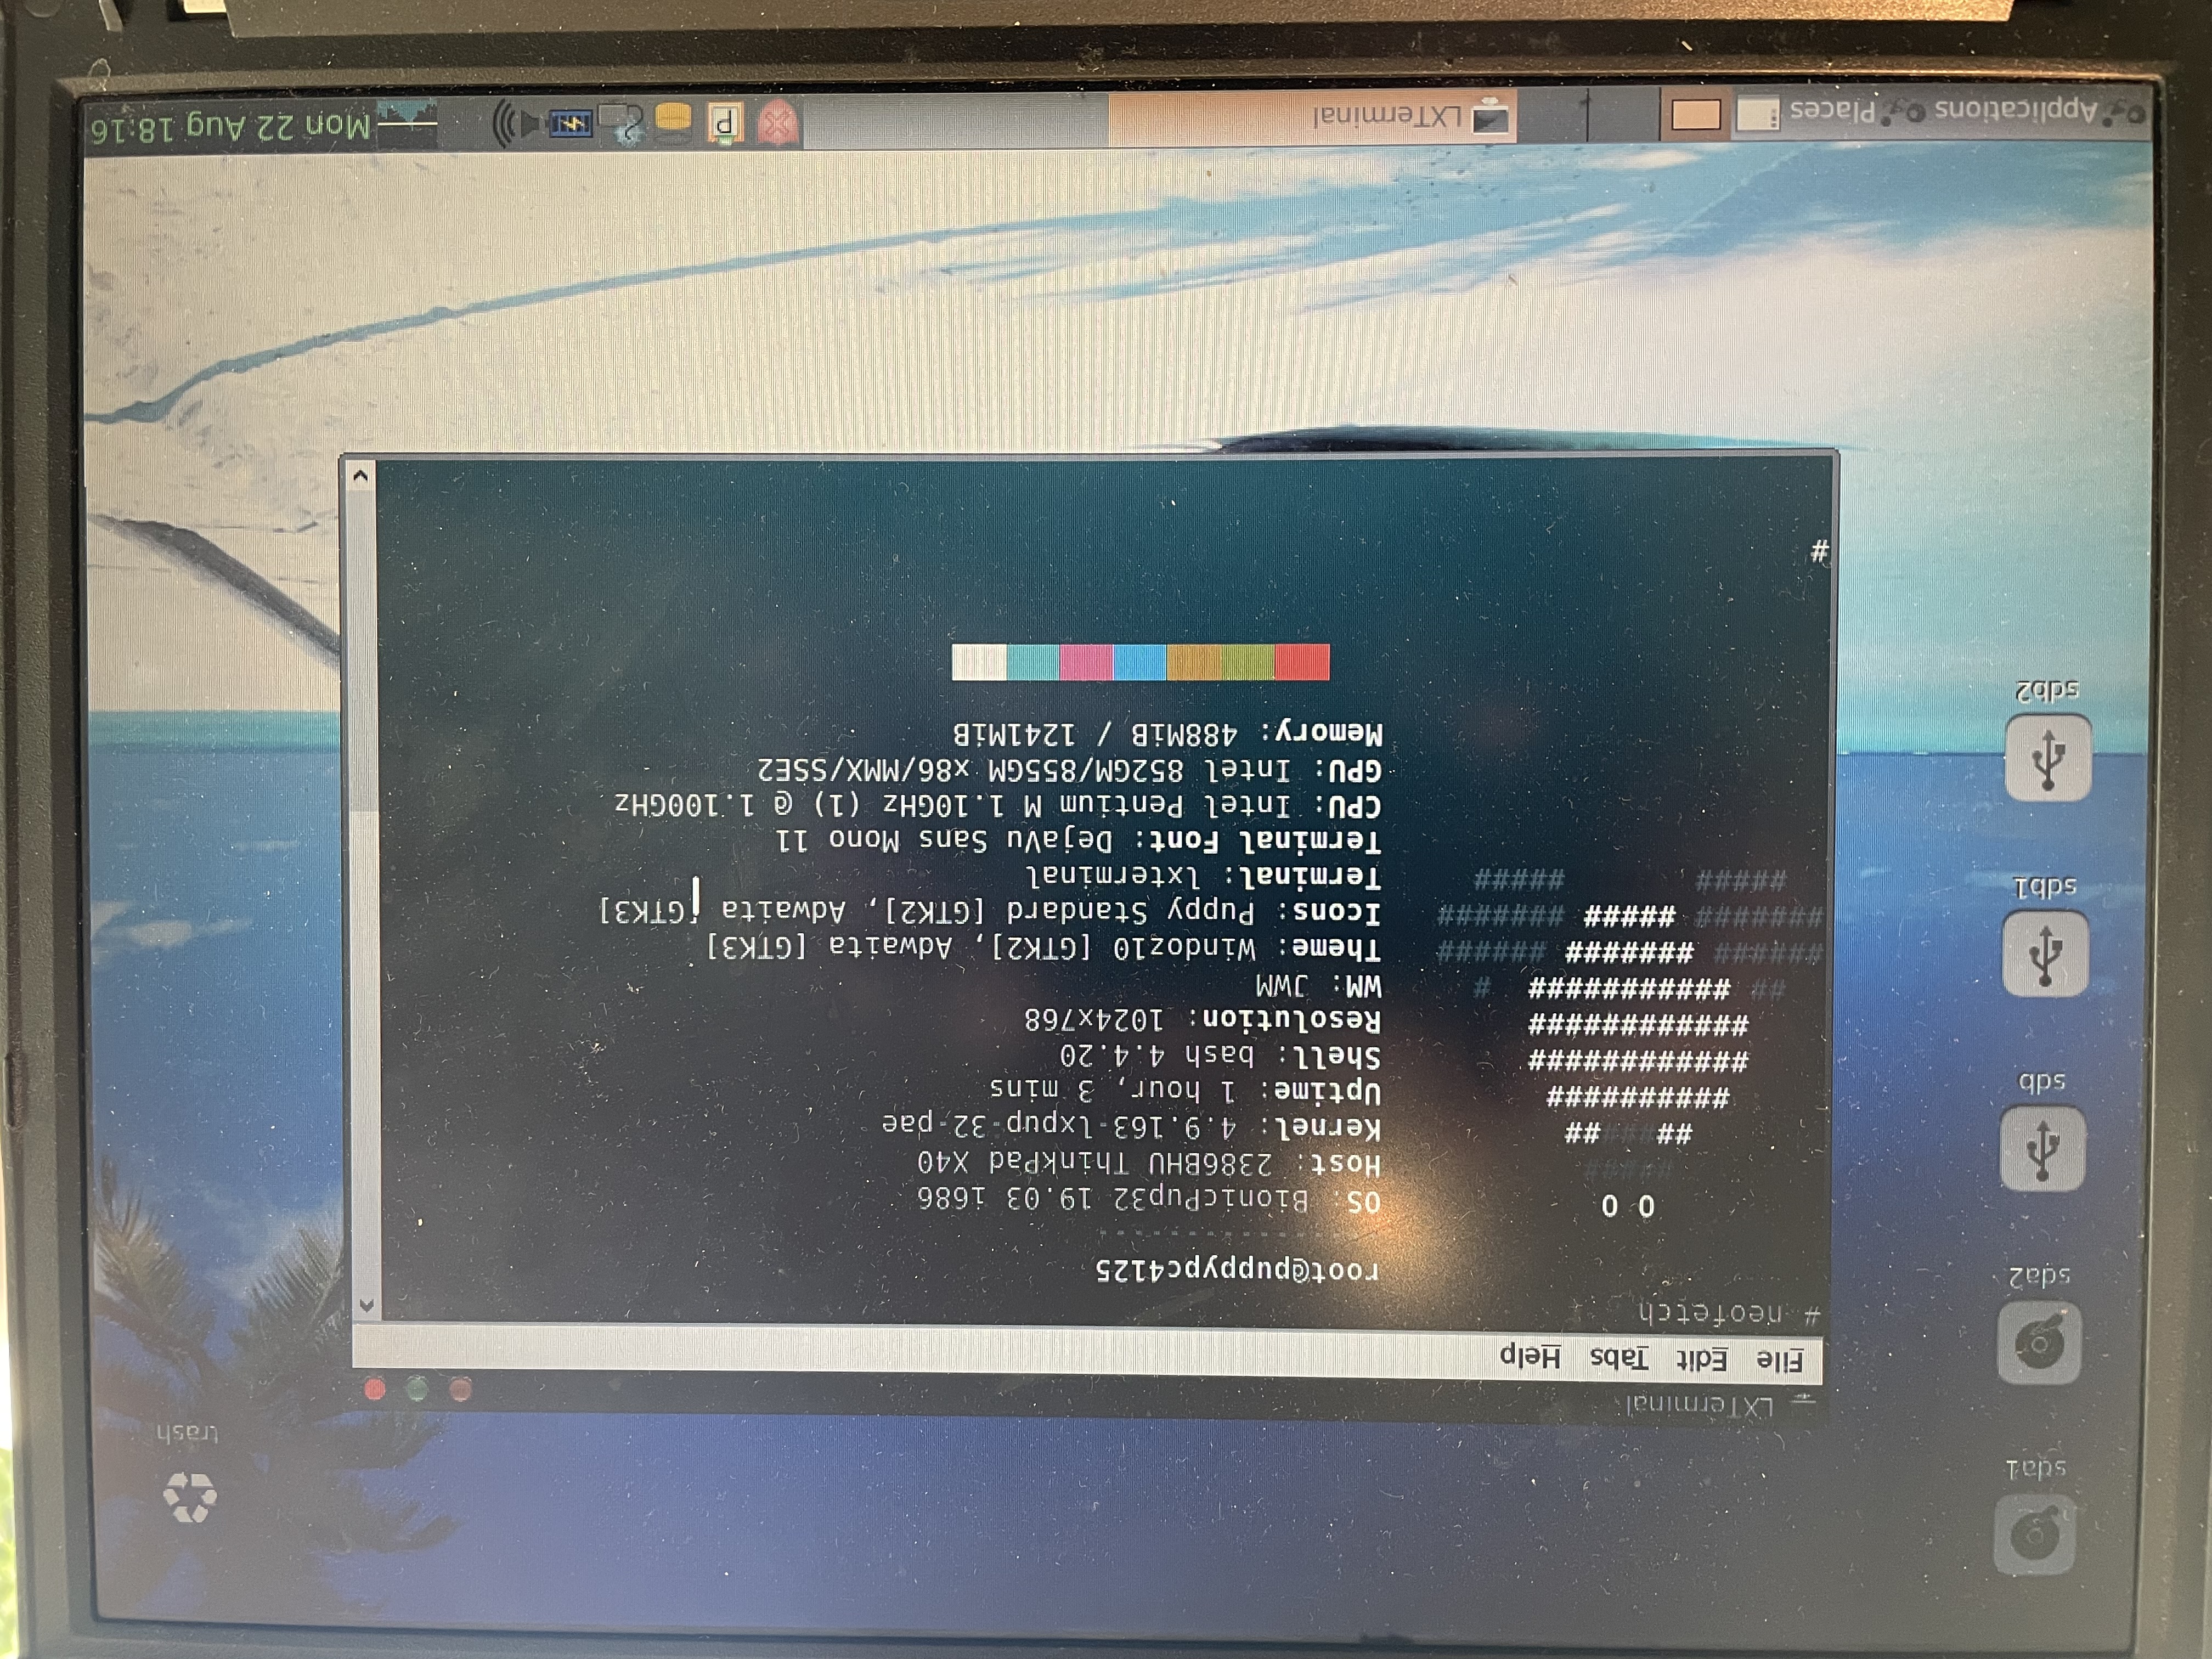 Neofetched stats for Puppy Linux install